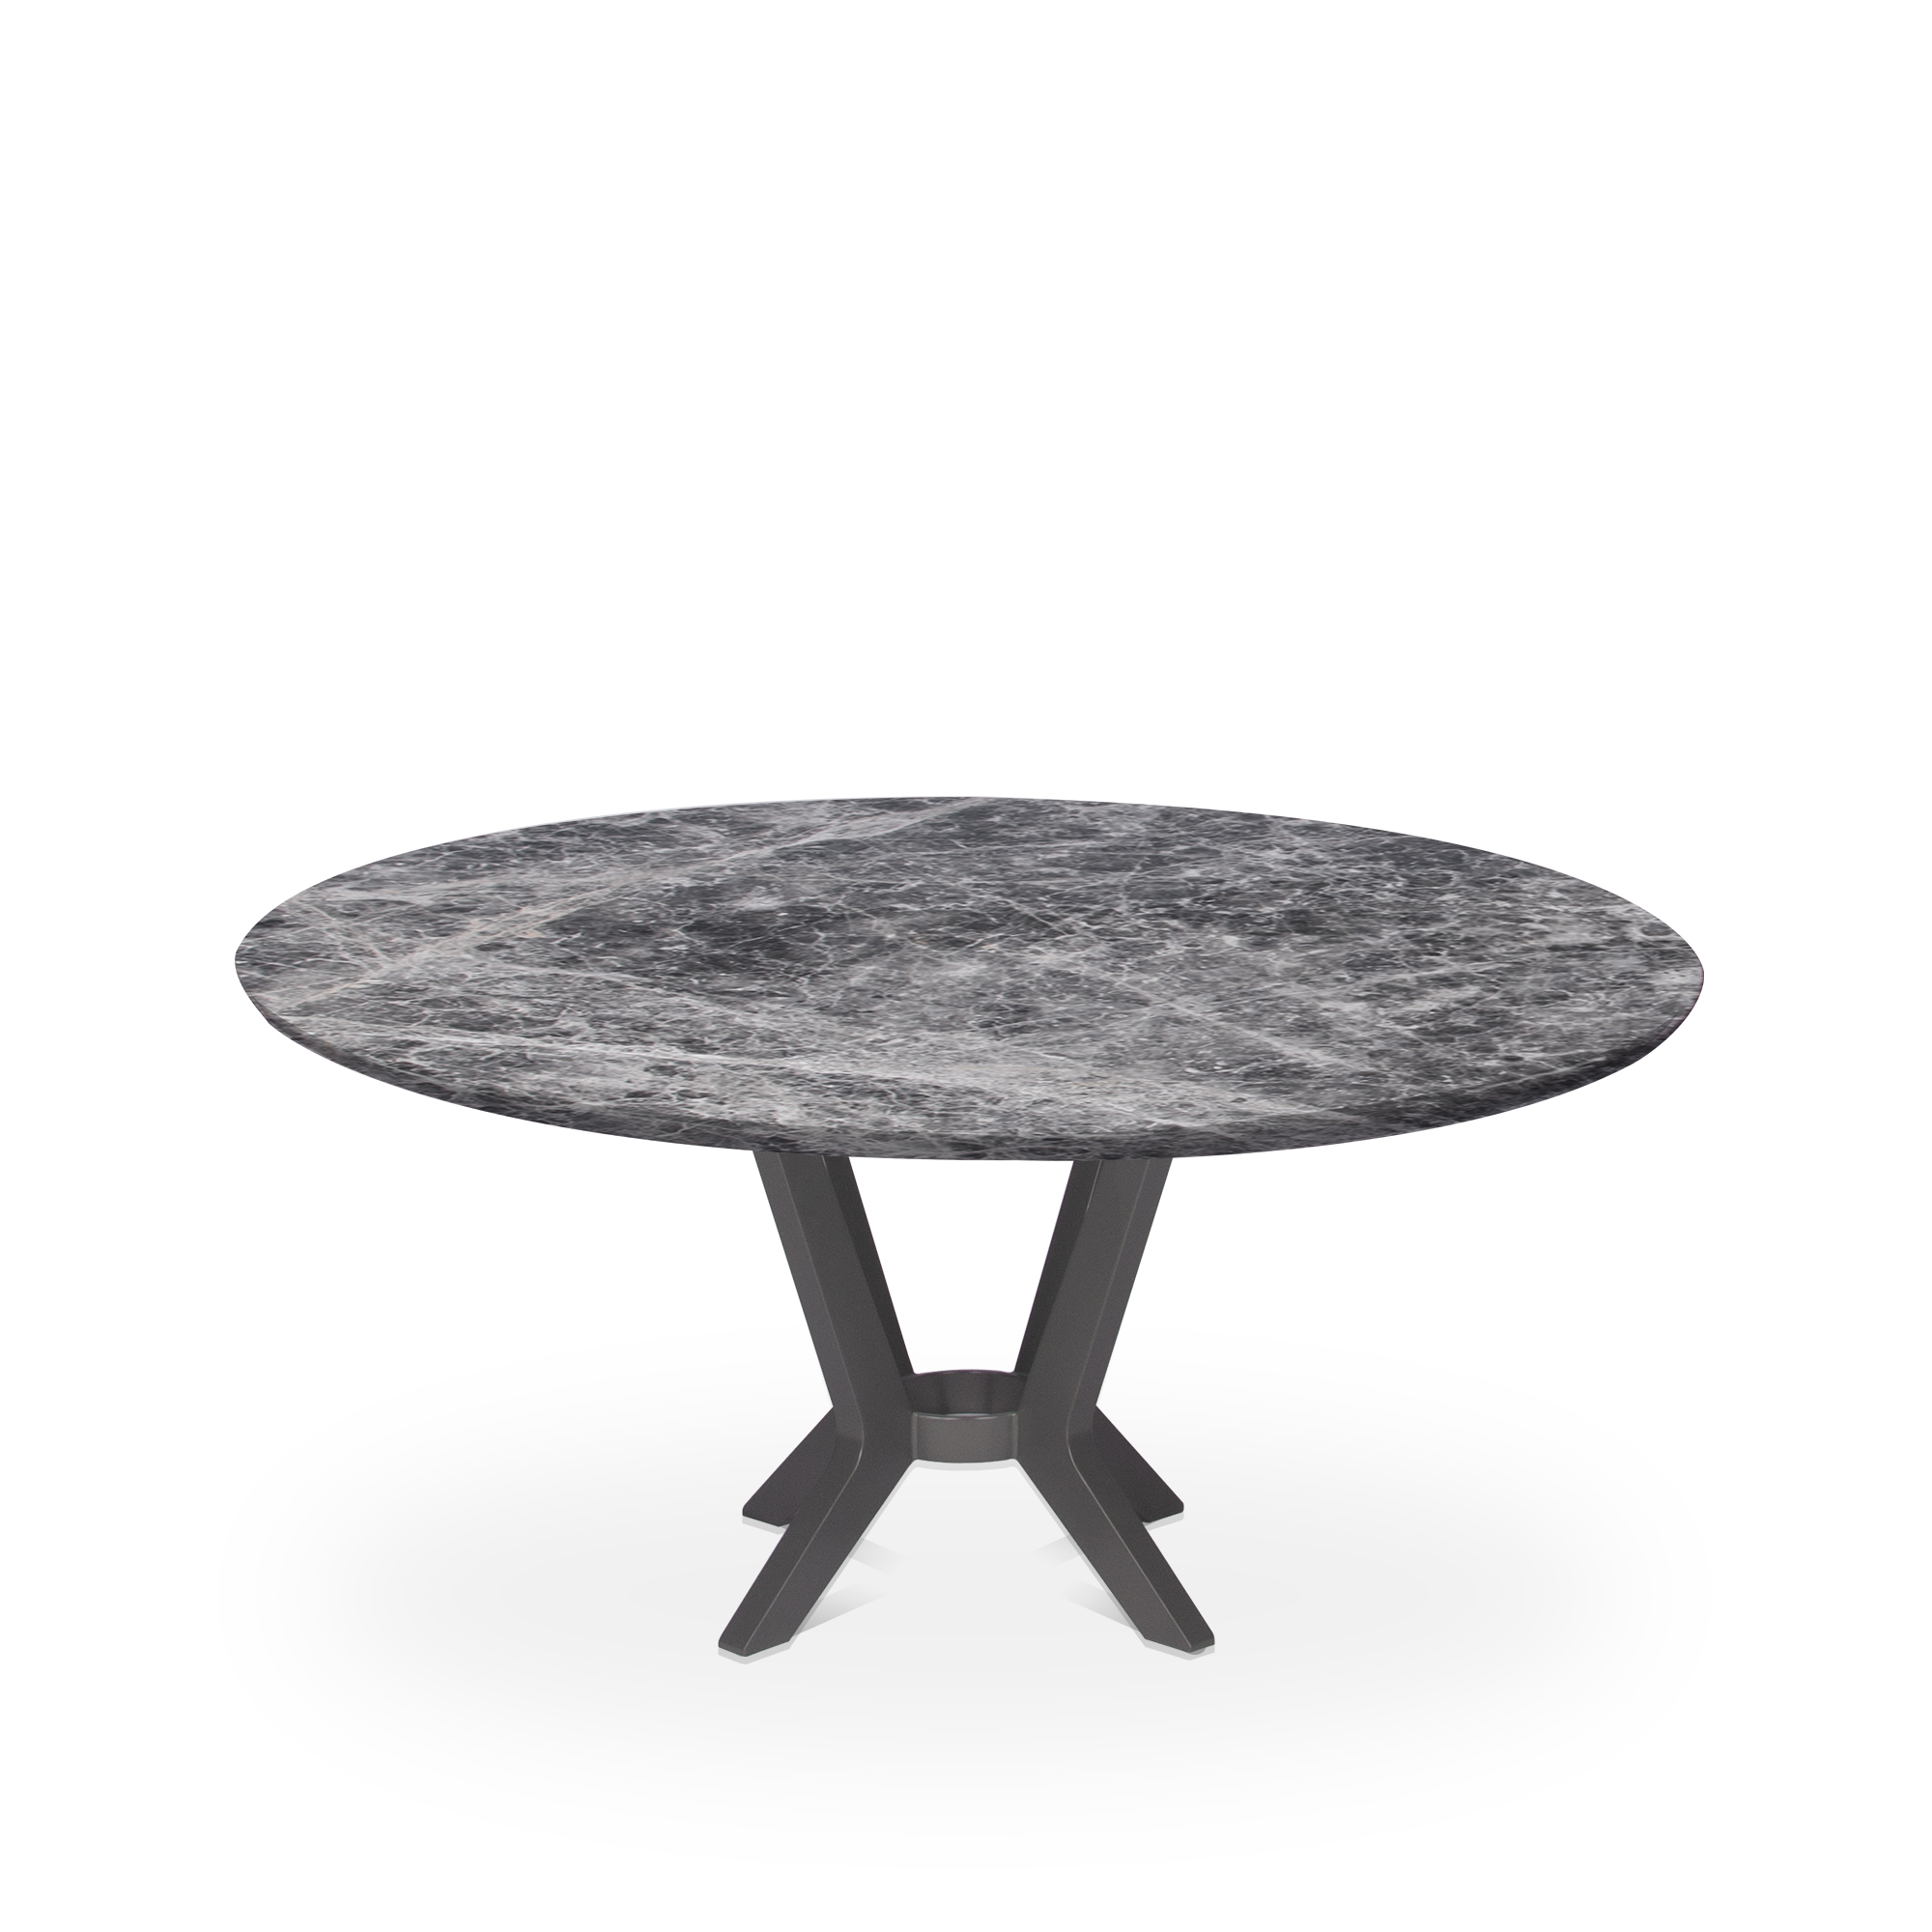 Stojic 2 | Art Series | Decasa Marble Marble Dining Table